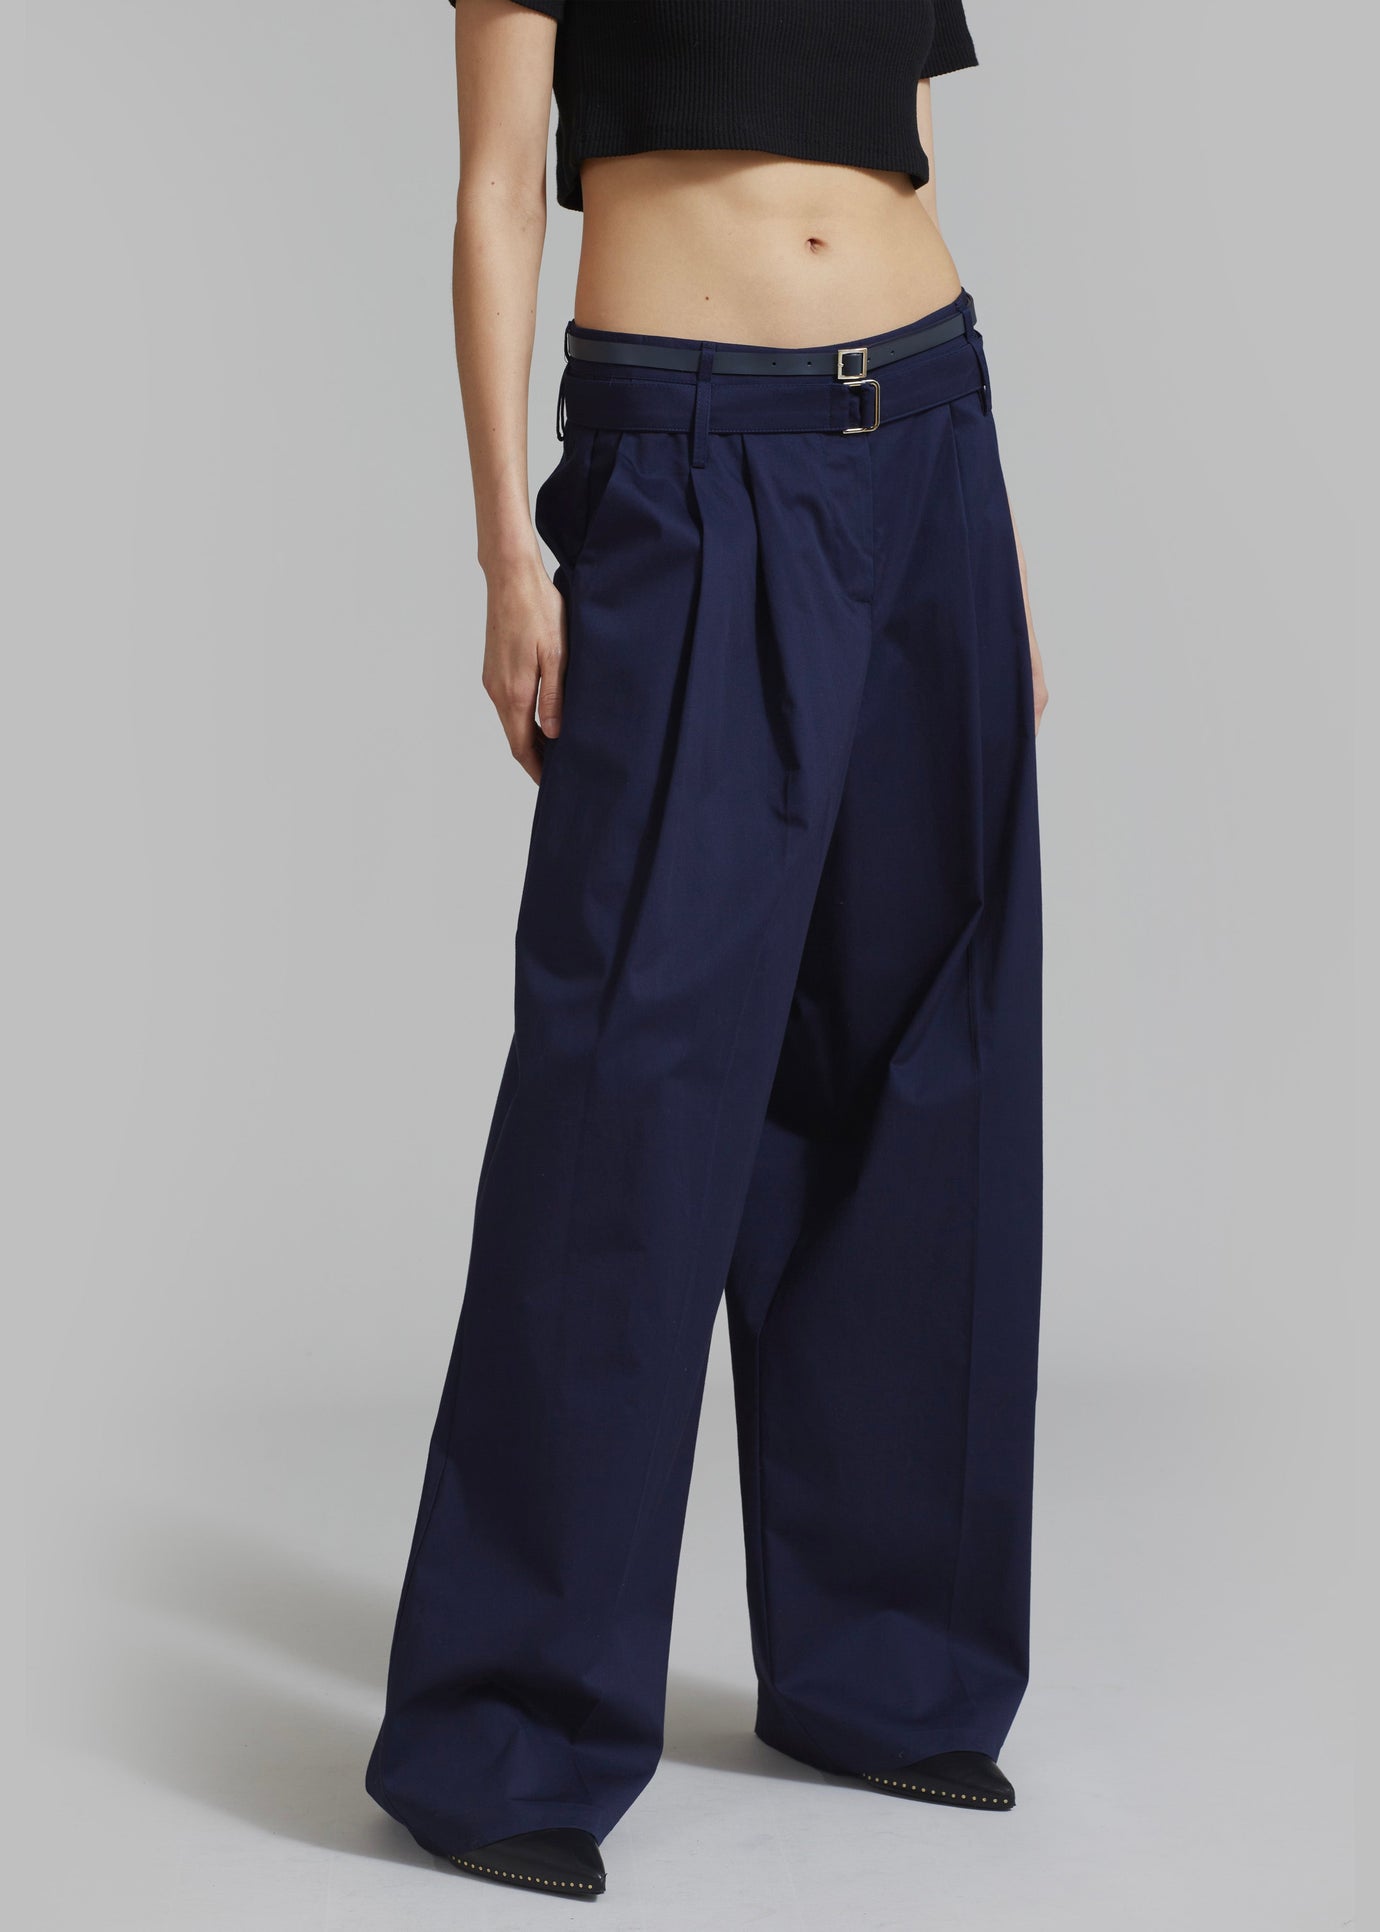 Joan Double Belted Pants - Navy